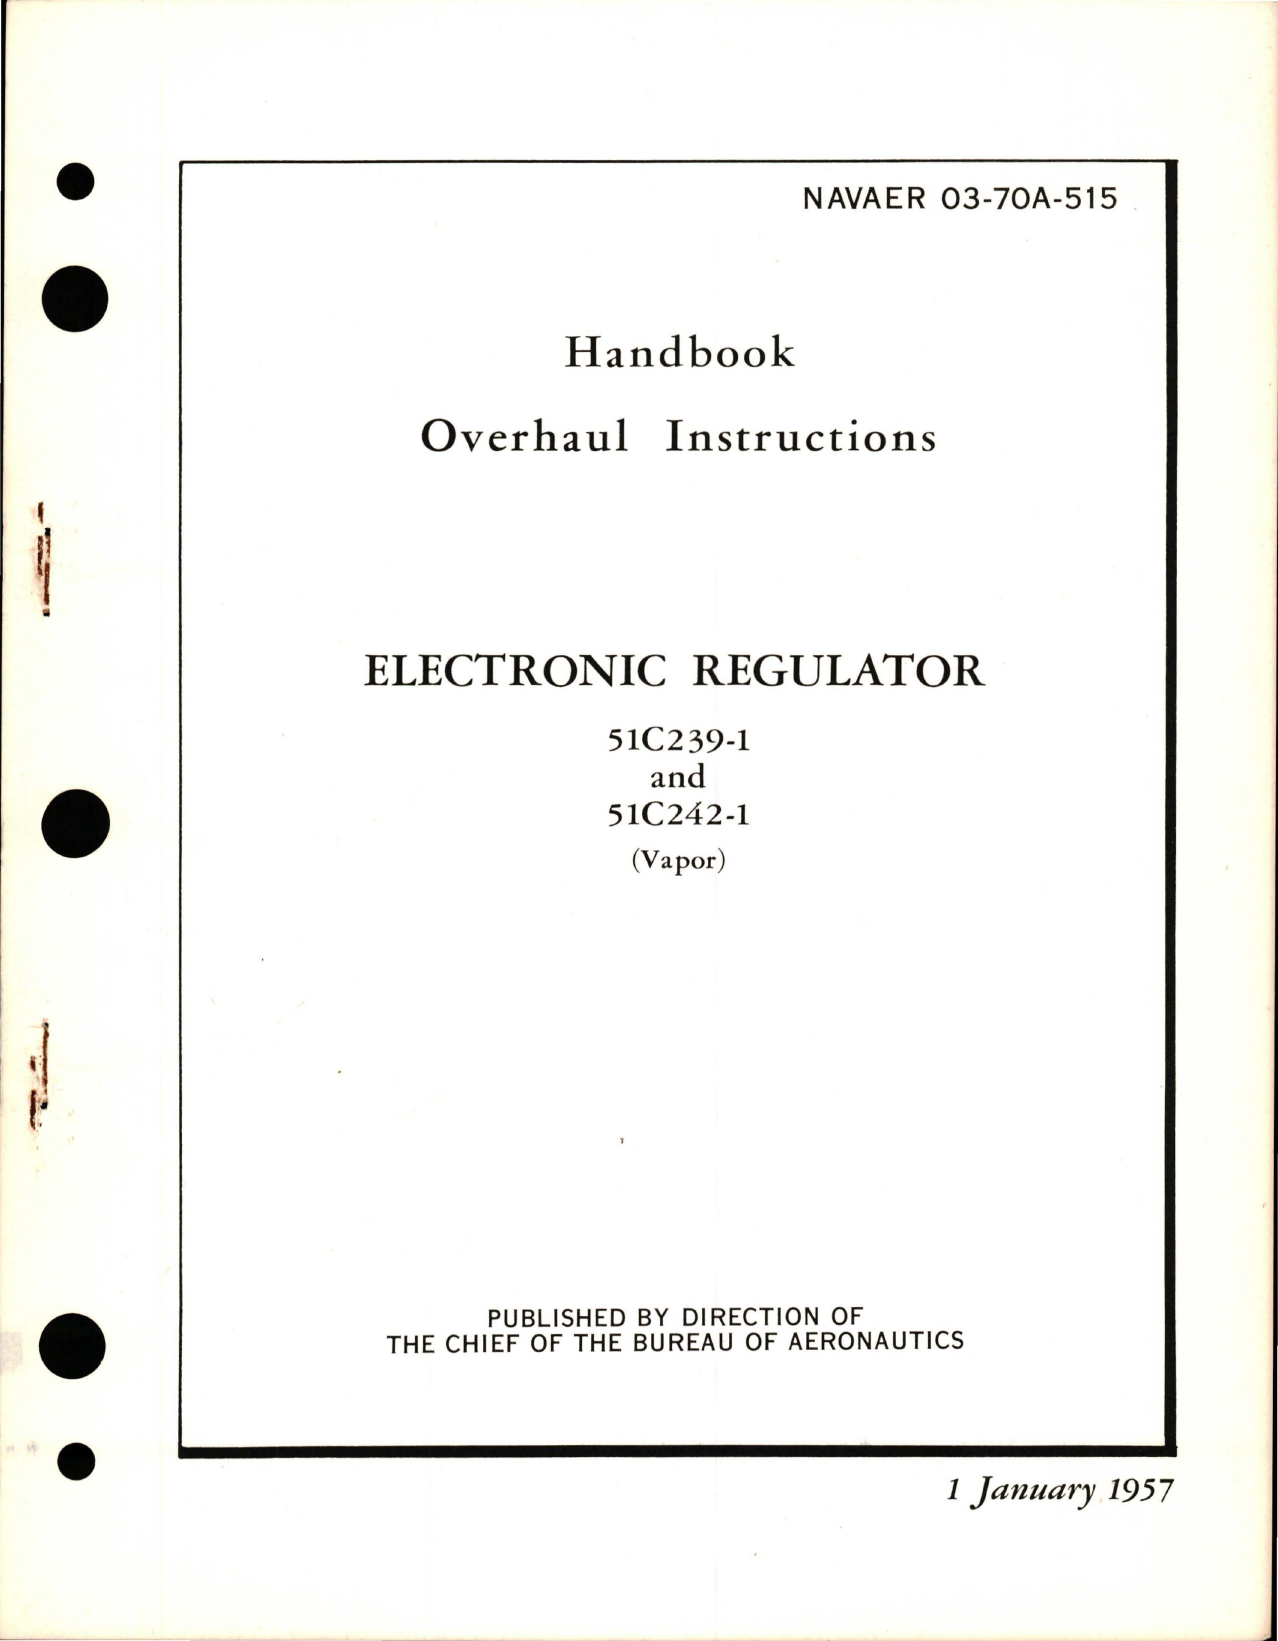 Sample page 1 from AirCorps Library document: Overhaul Instructions for Electronic Regulator - 51C239-1 and 51C242-1